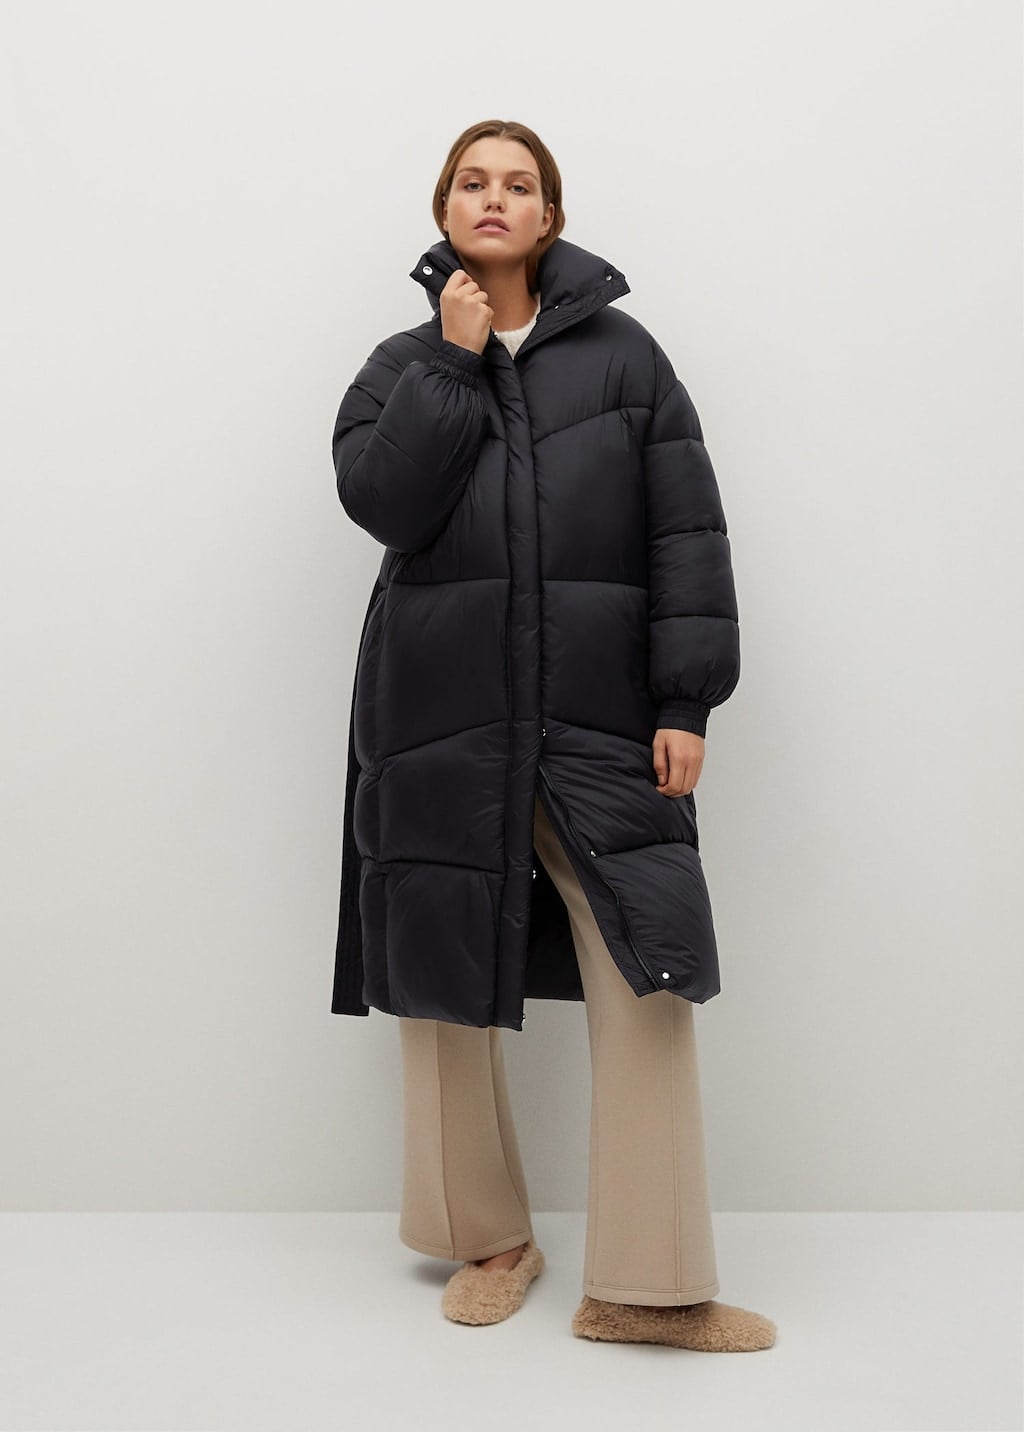 Ziekte val Christendom Mango Oversized Padded Coat | Yes, You Should Invest in a Sleeping-Bag Coat  | POPSUGAR Fashion Photo 2